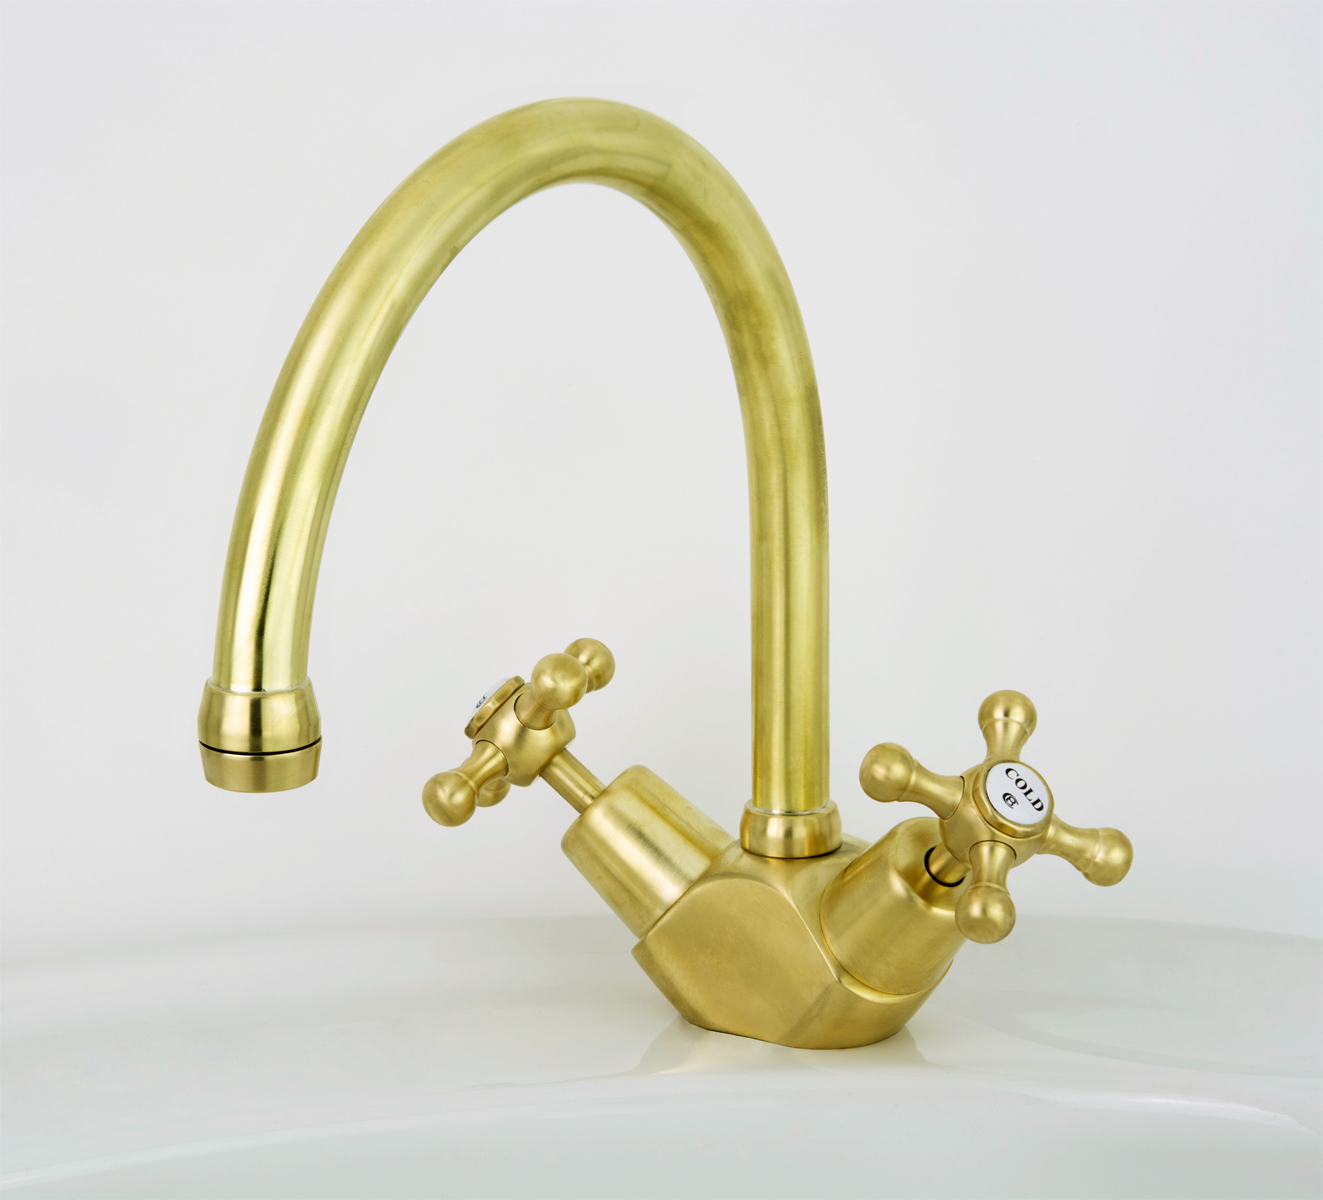 Roulette Sink Duo Mixer with Swivel Gooseneck Outlet in Lea Wheeled Brass with Standard Buttons